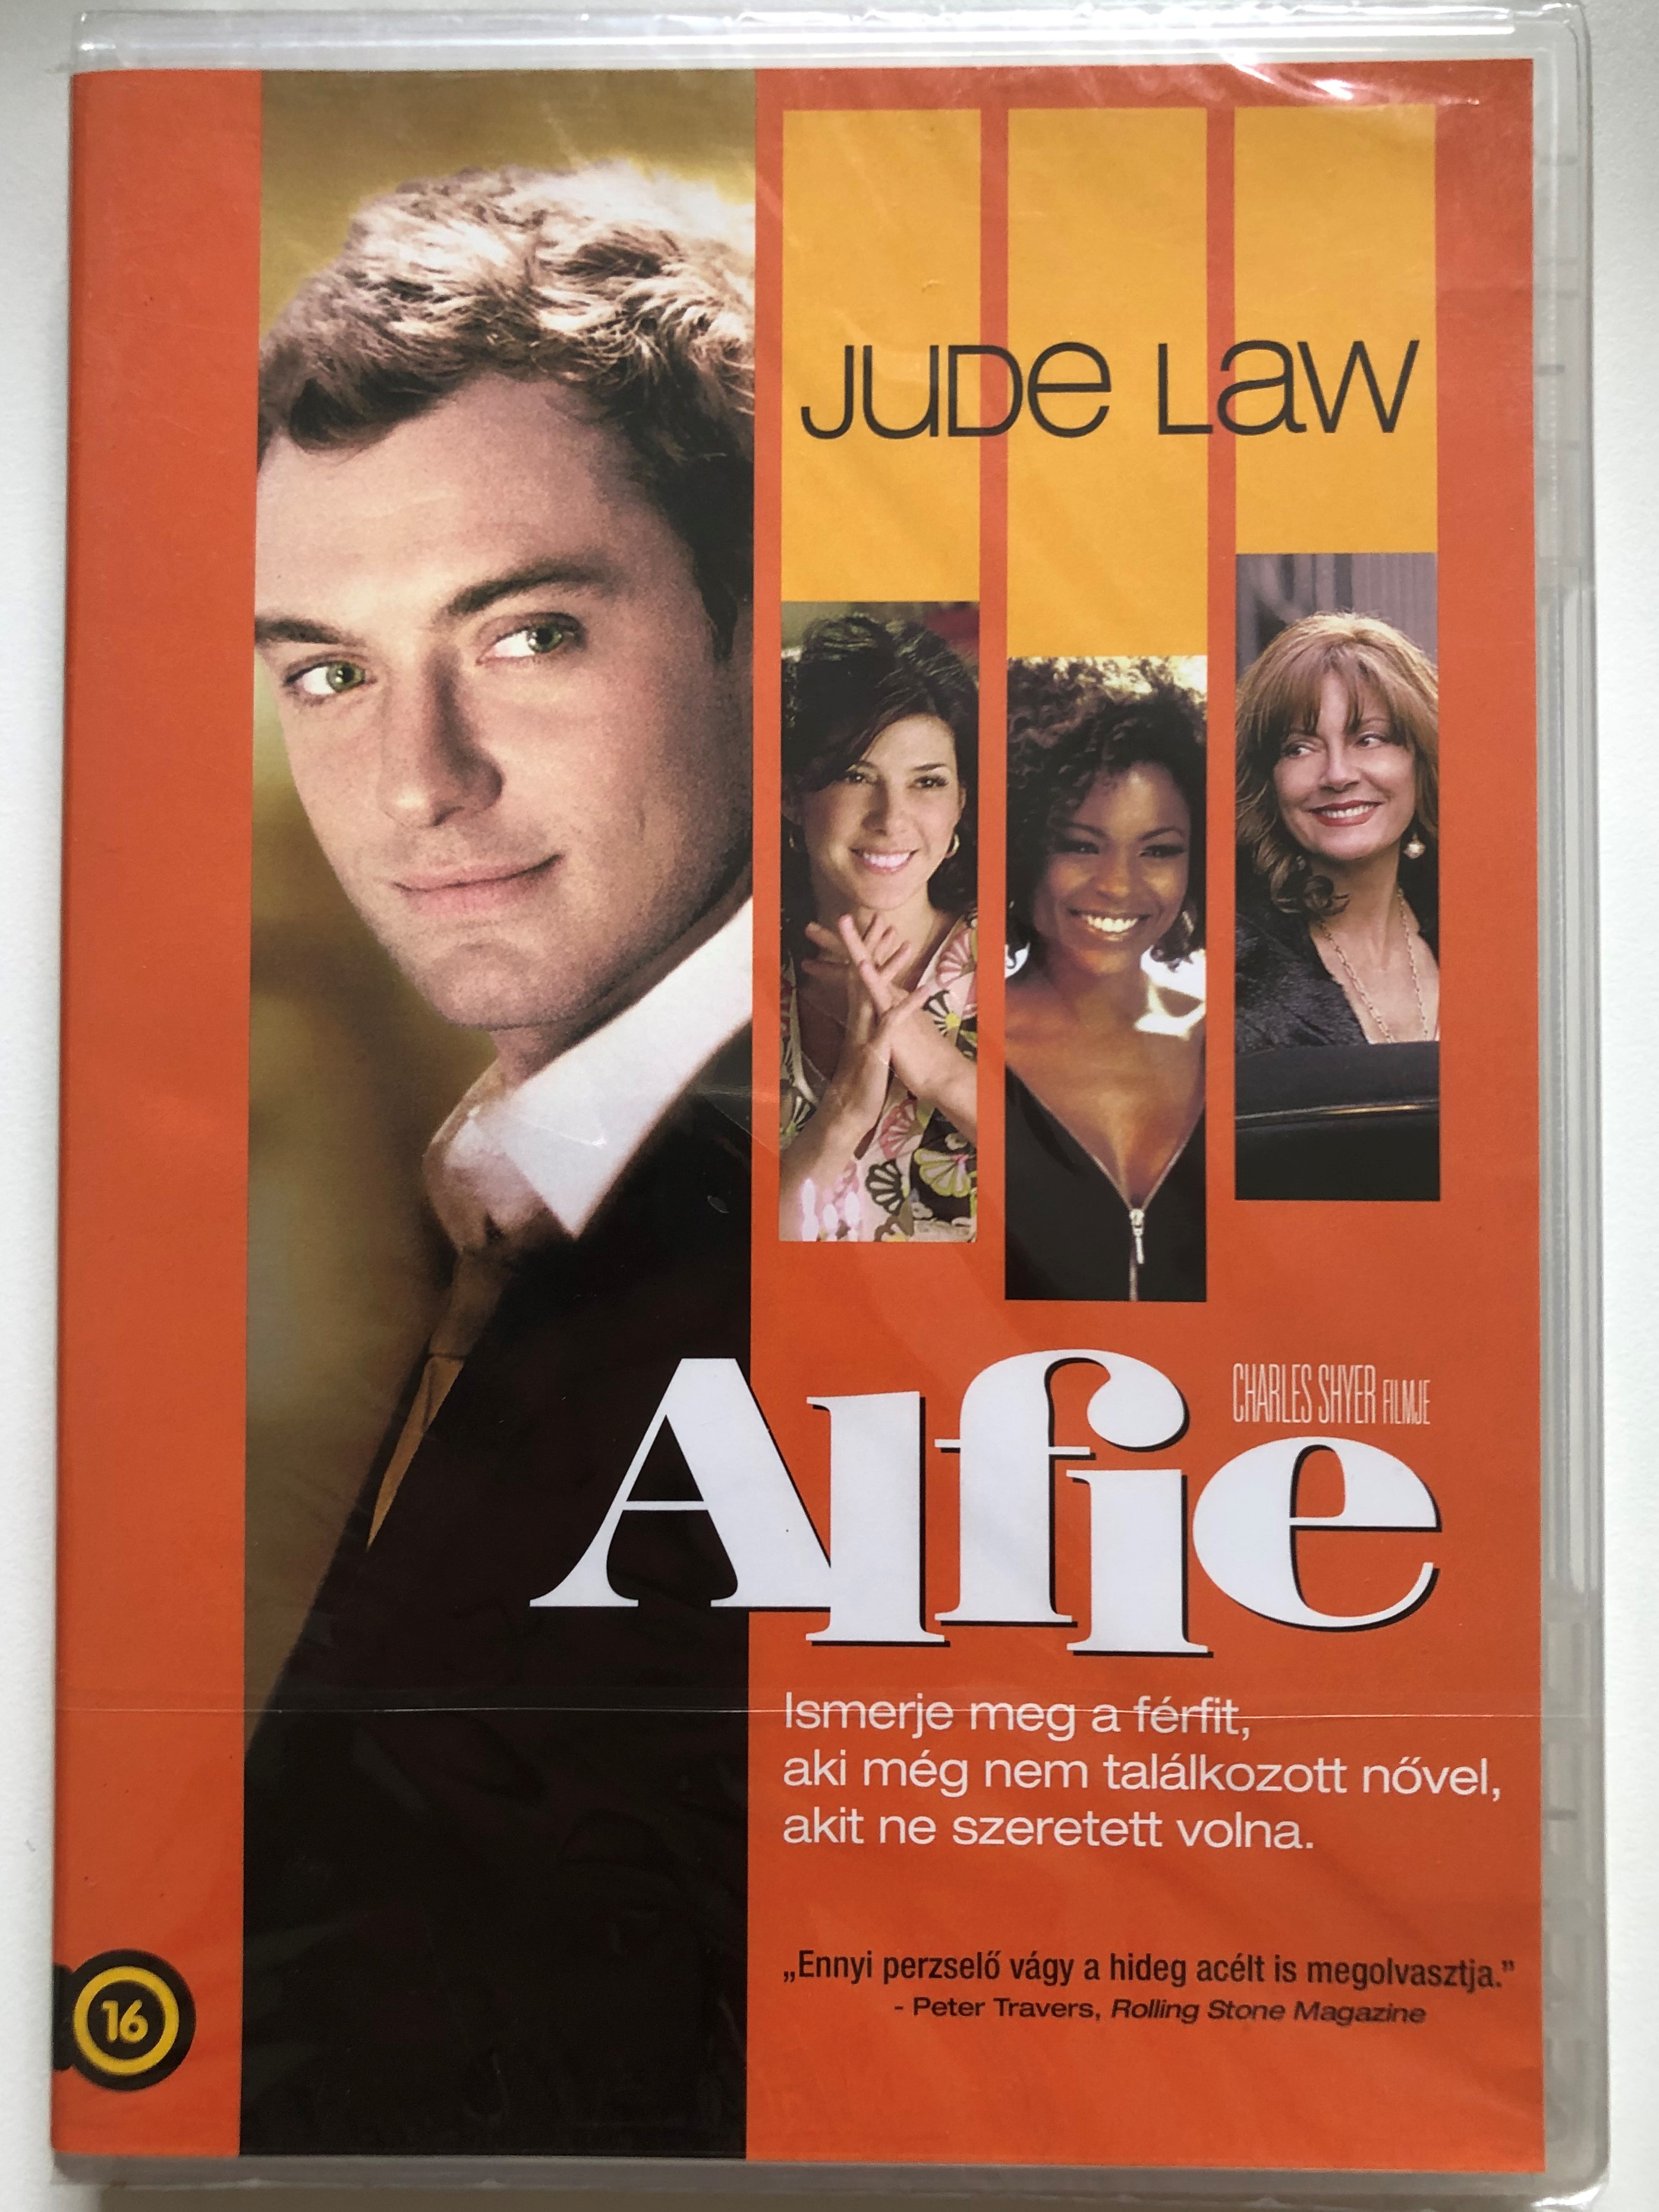 Alfie DVD 2004 / Directed by Charles Shyer / Starring Jude Law, Marisa Tomei, Omar Epps, Nia Long